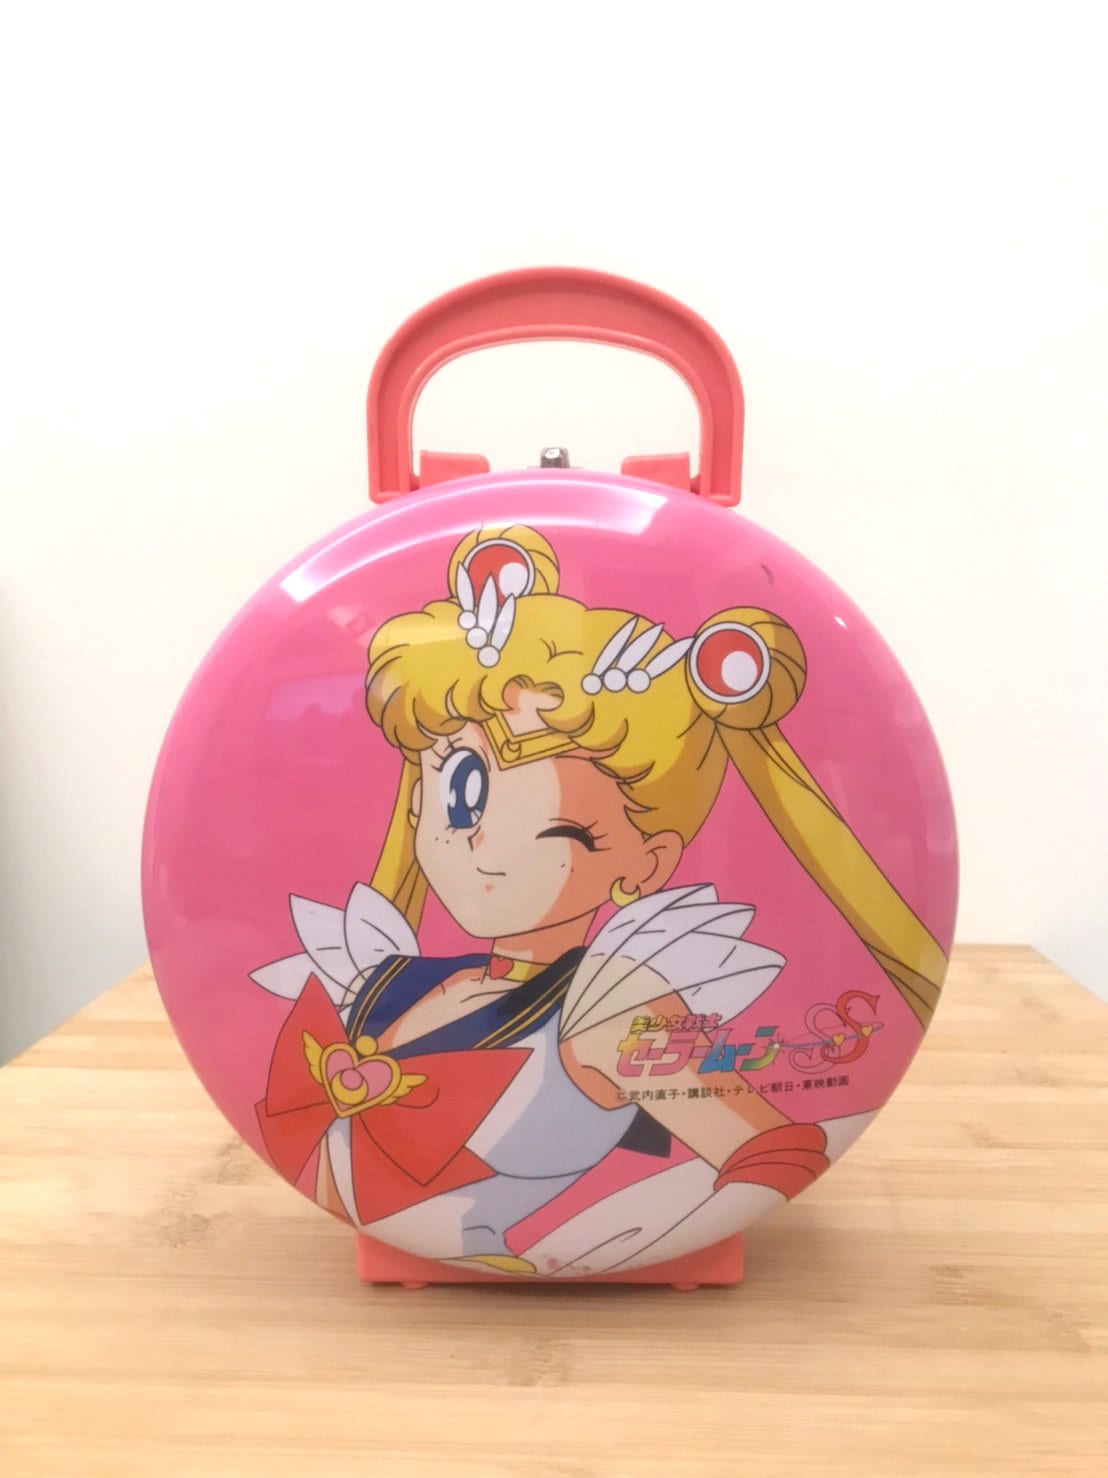 SALE Vintage Sailor Moon Pink Round Iron Carrying Box 